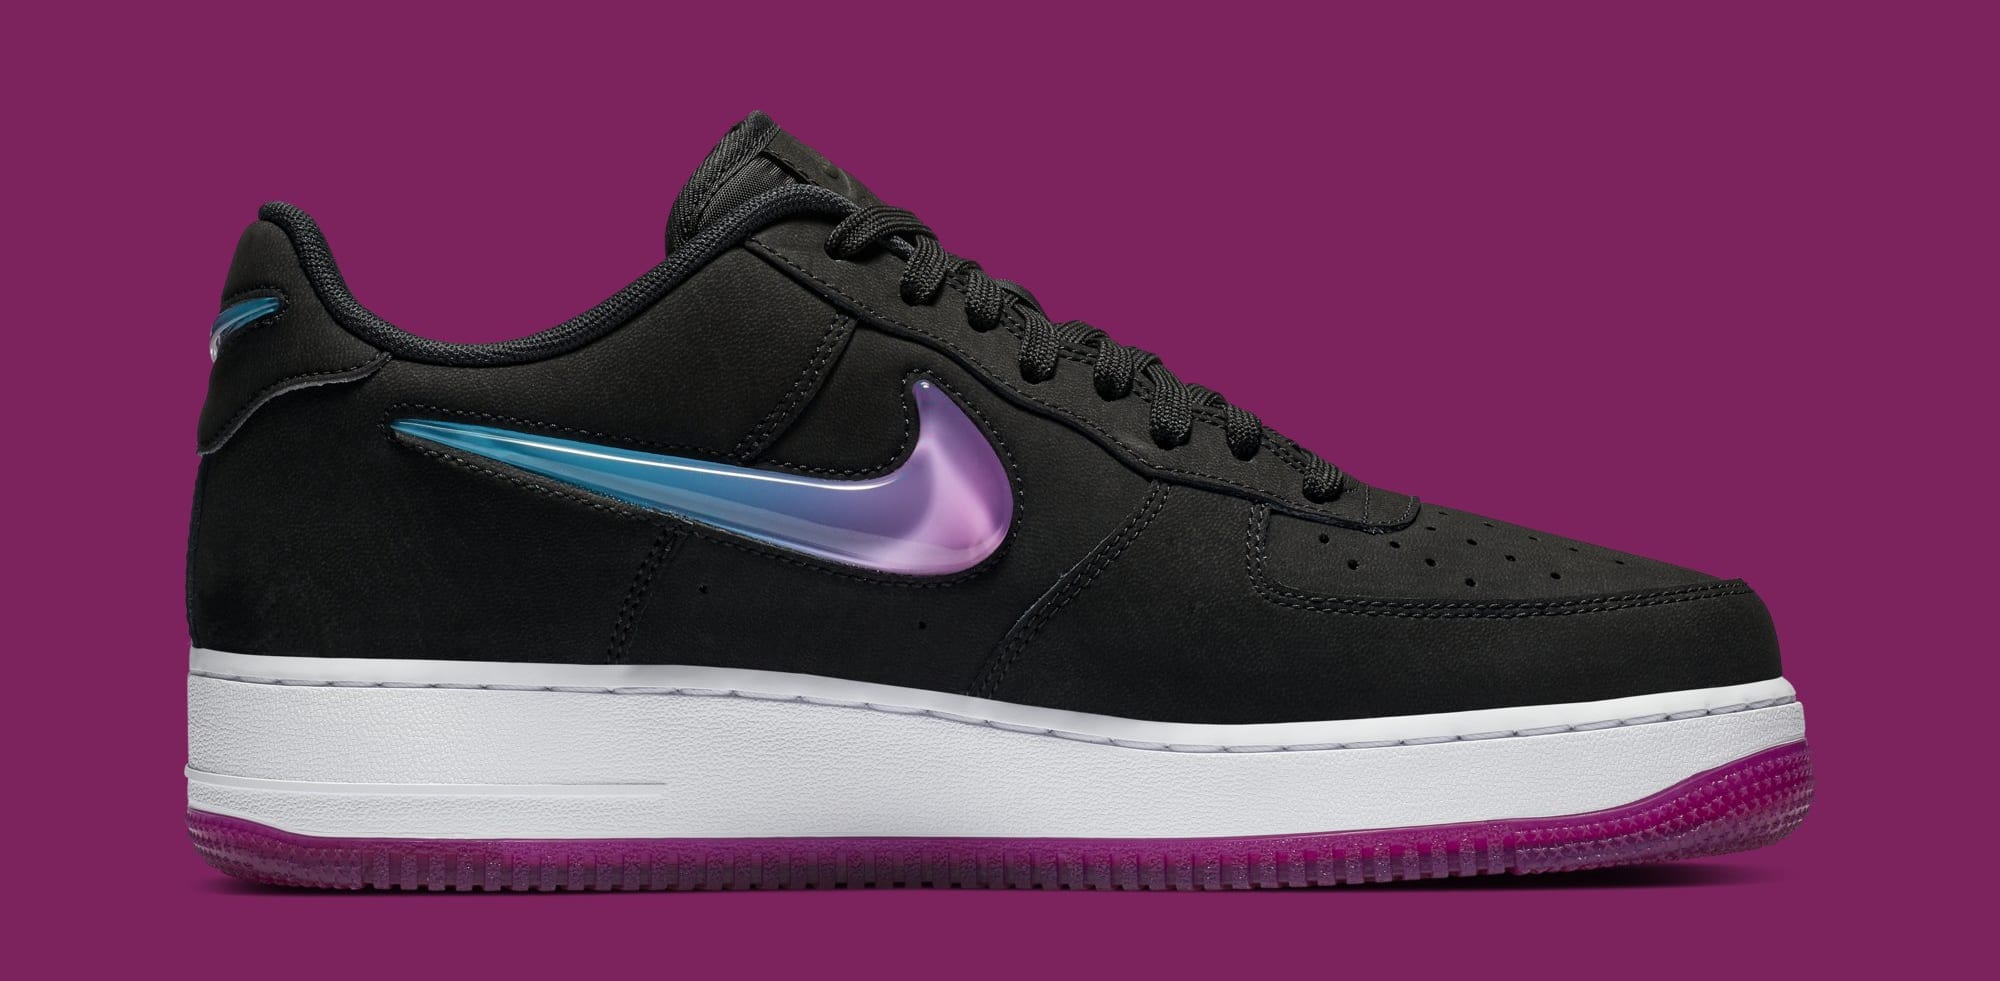 Nike Air Force 1 Low Jewel &#x27;Black/Active Fuchsia-Blue Lagoon-White&#x27; AT4143-001 (Medial)